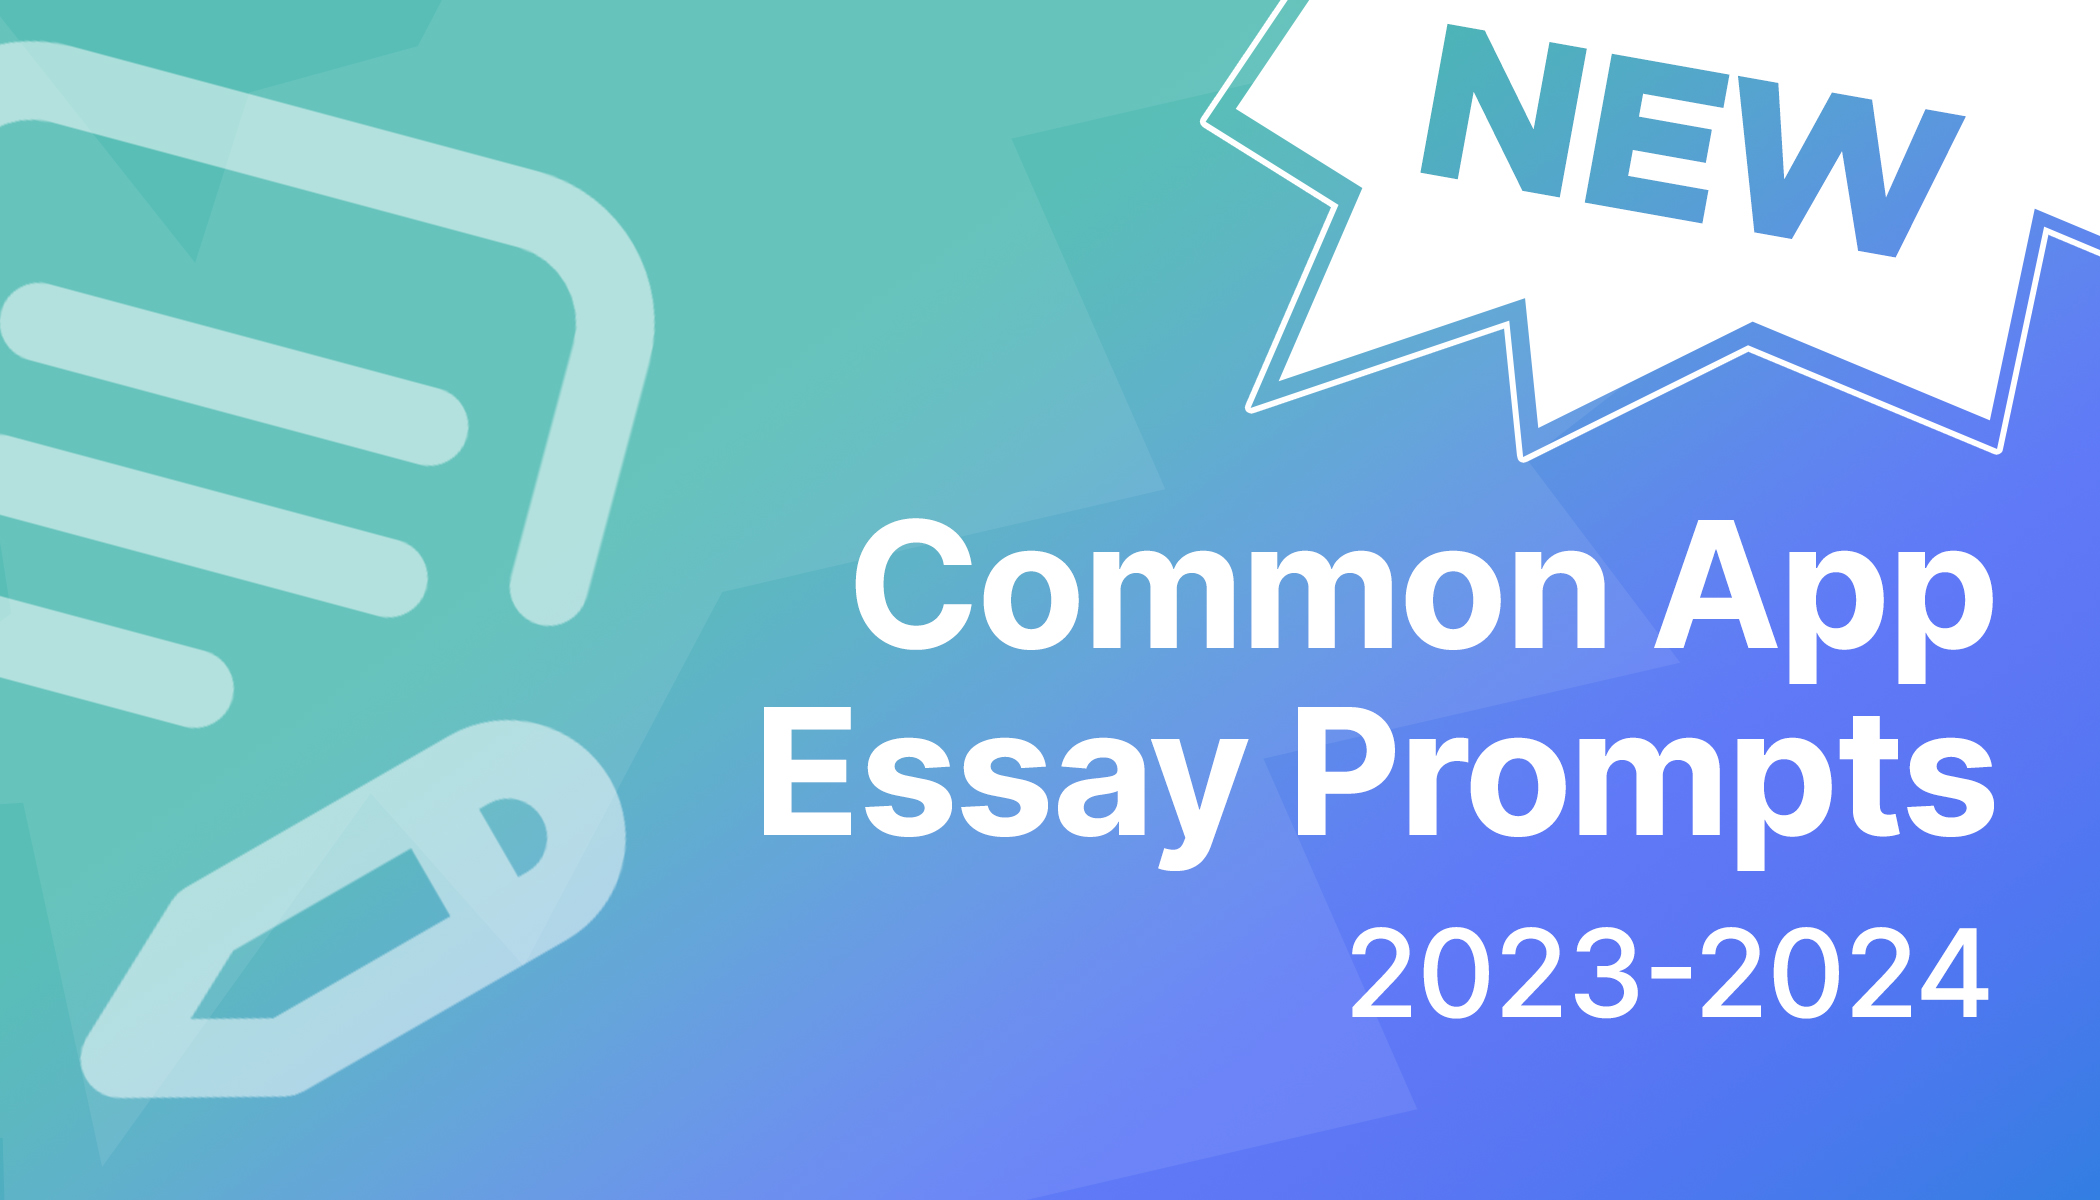 what are the common app essay prompts 2023